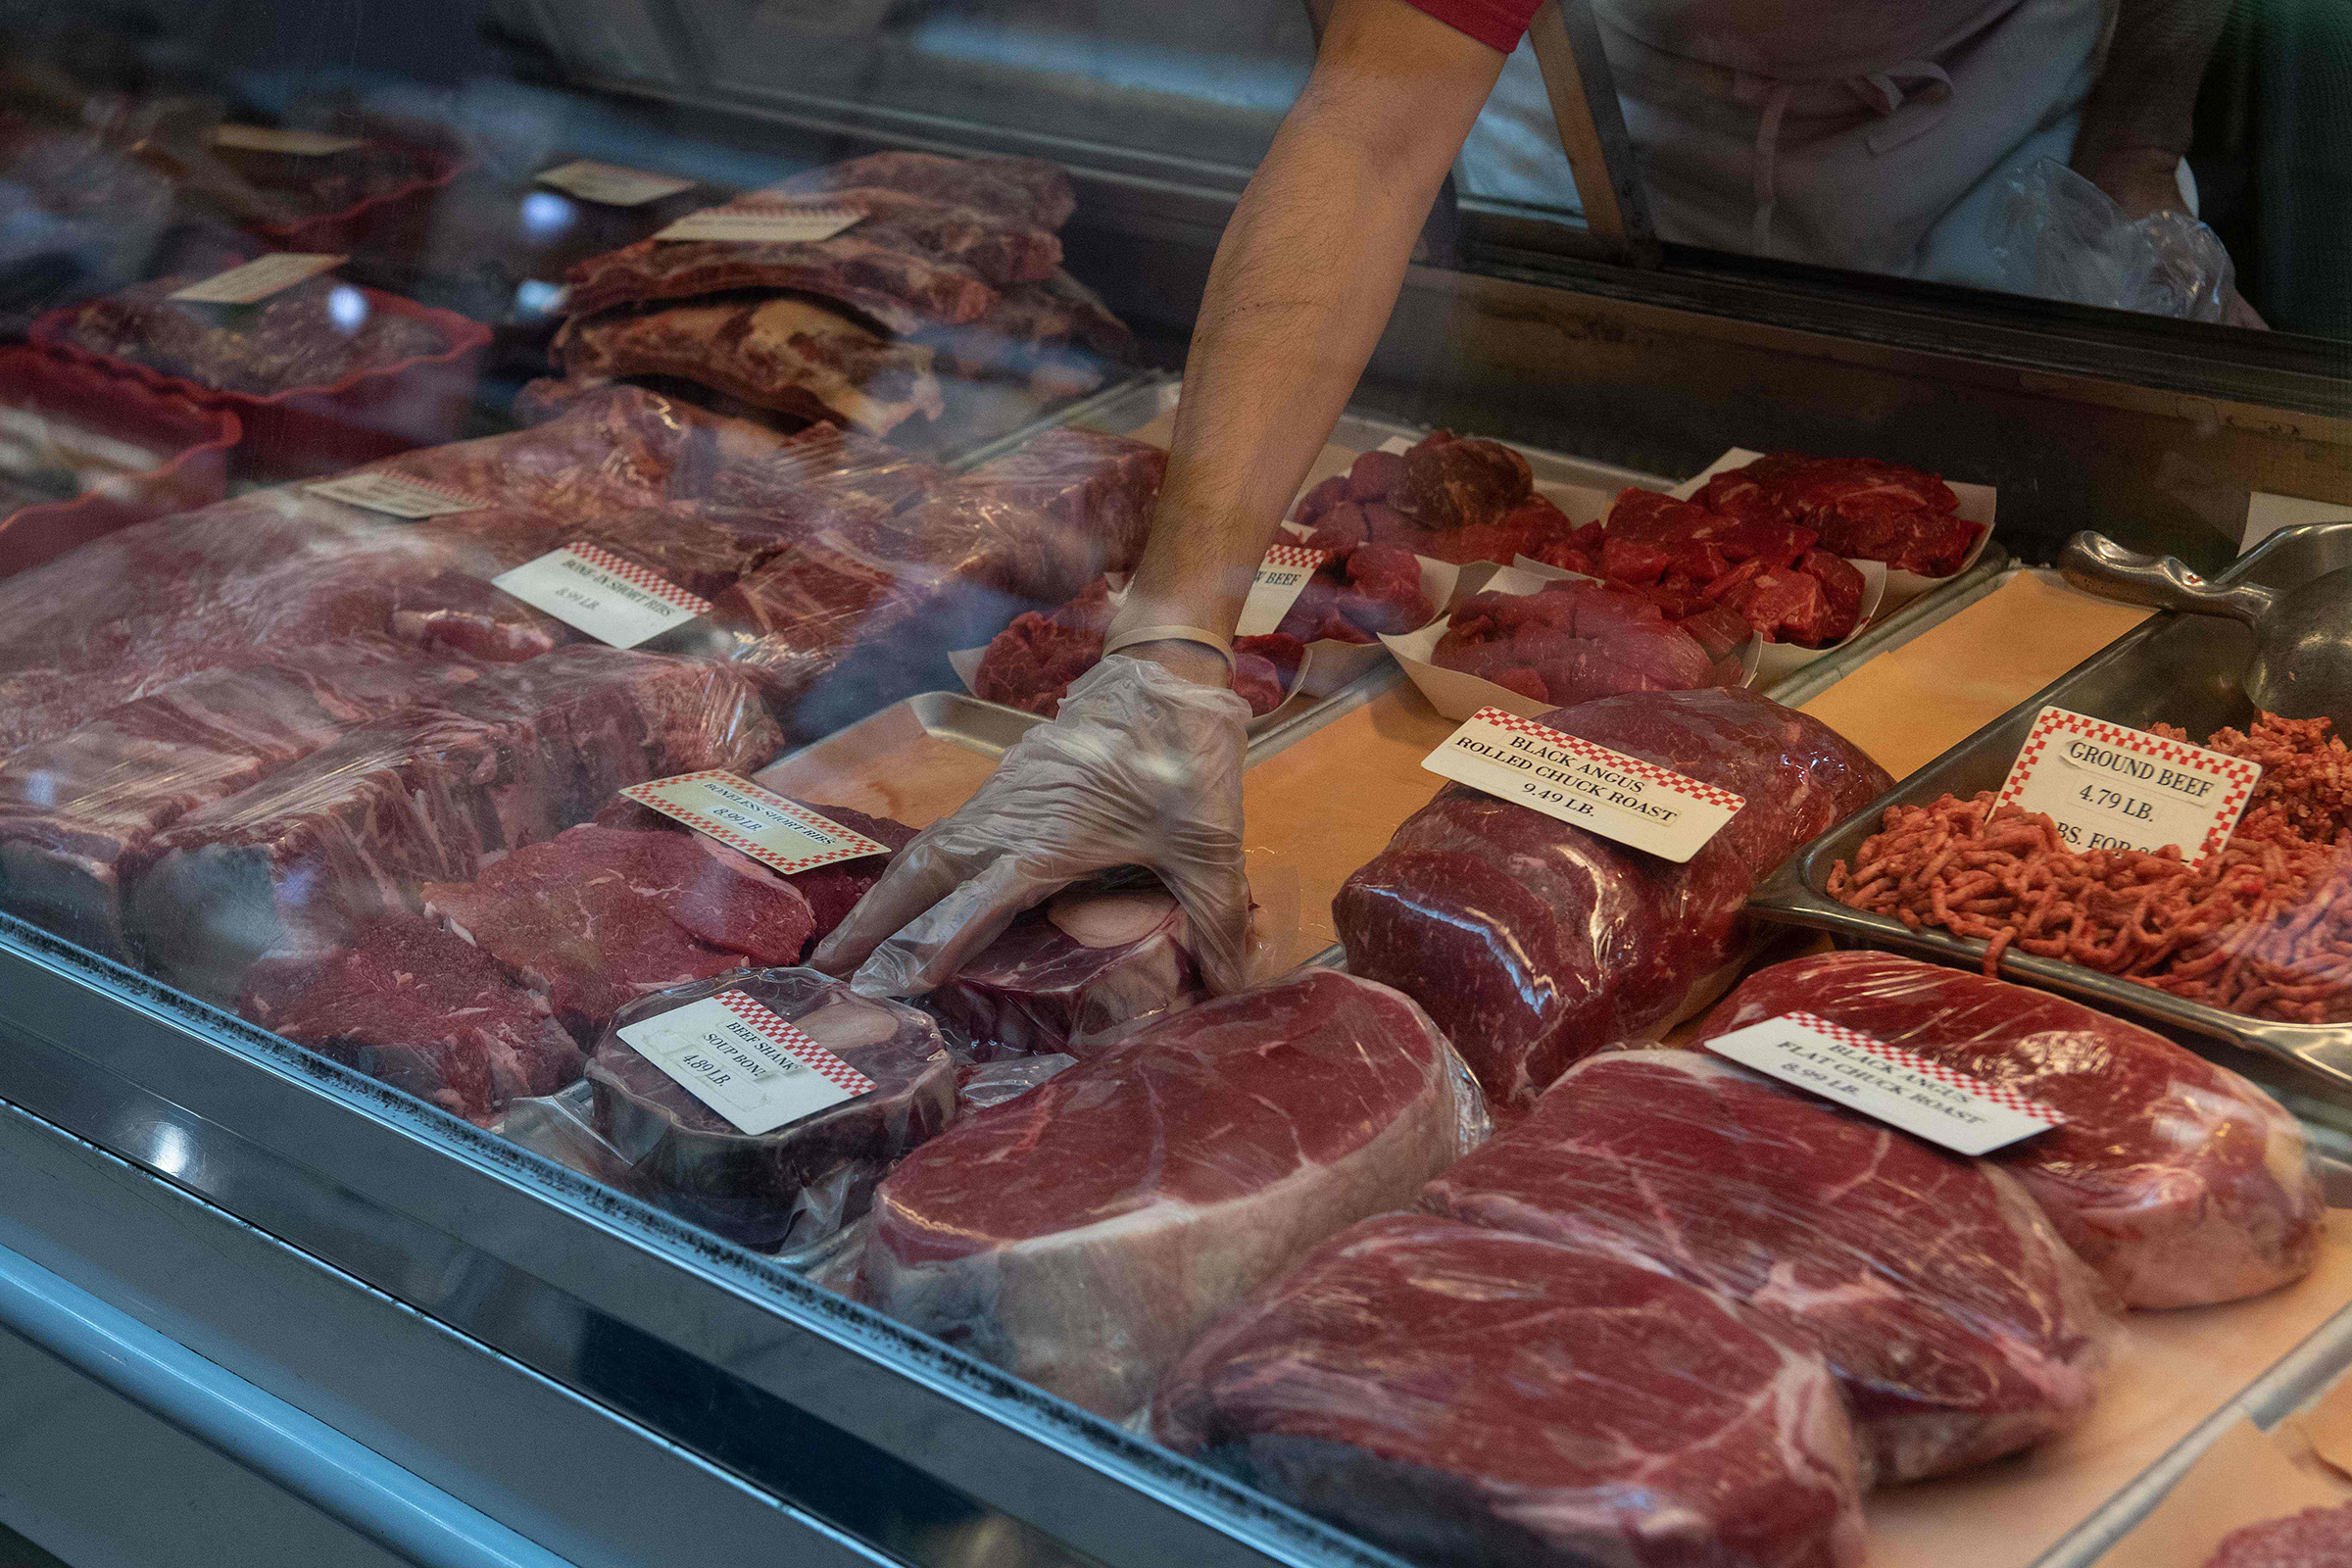 A butcher picks up a cut of beef at Eastern Market in Washington, D.C., on May 5 (Nicholas Kamm—AFP/Getty Images)